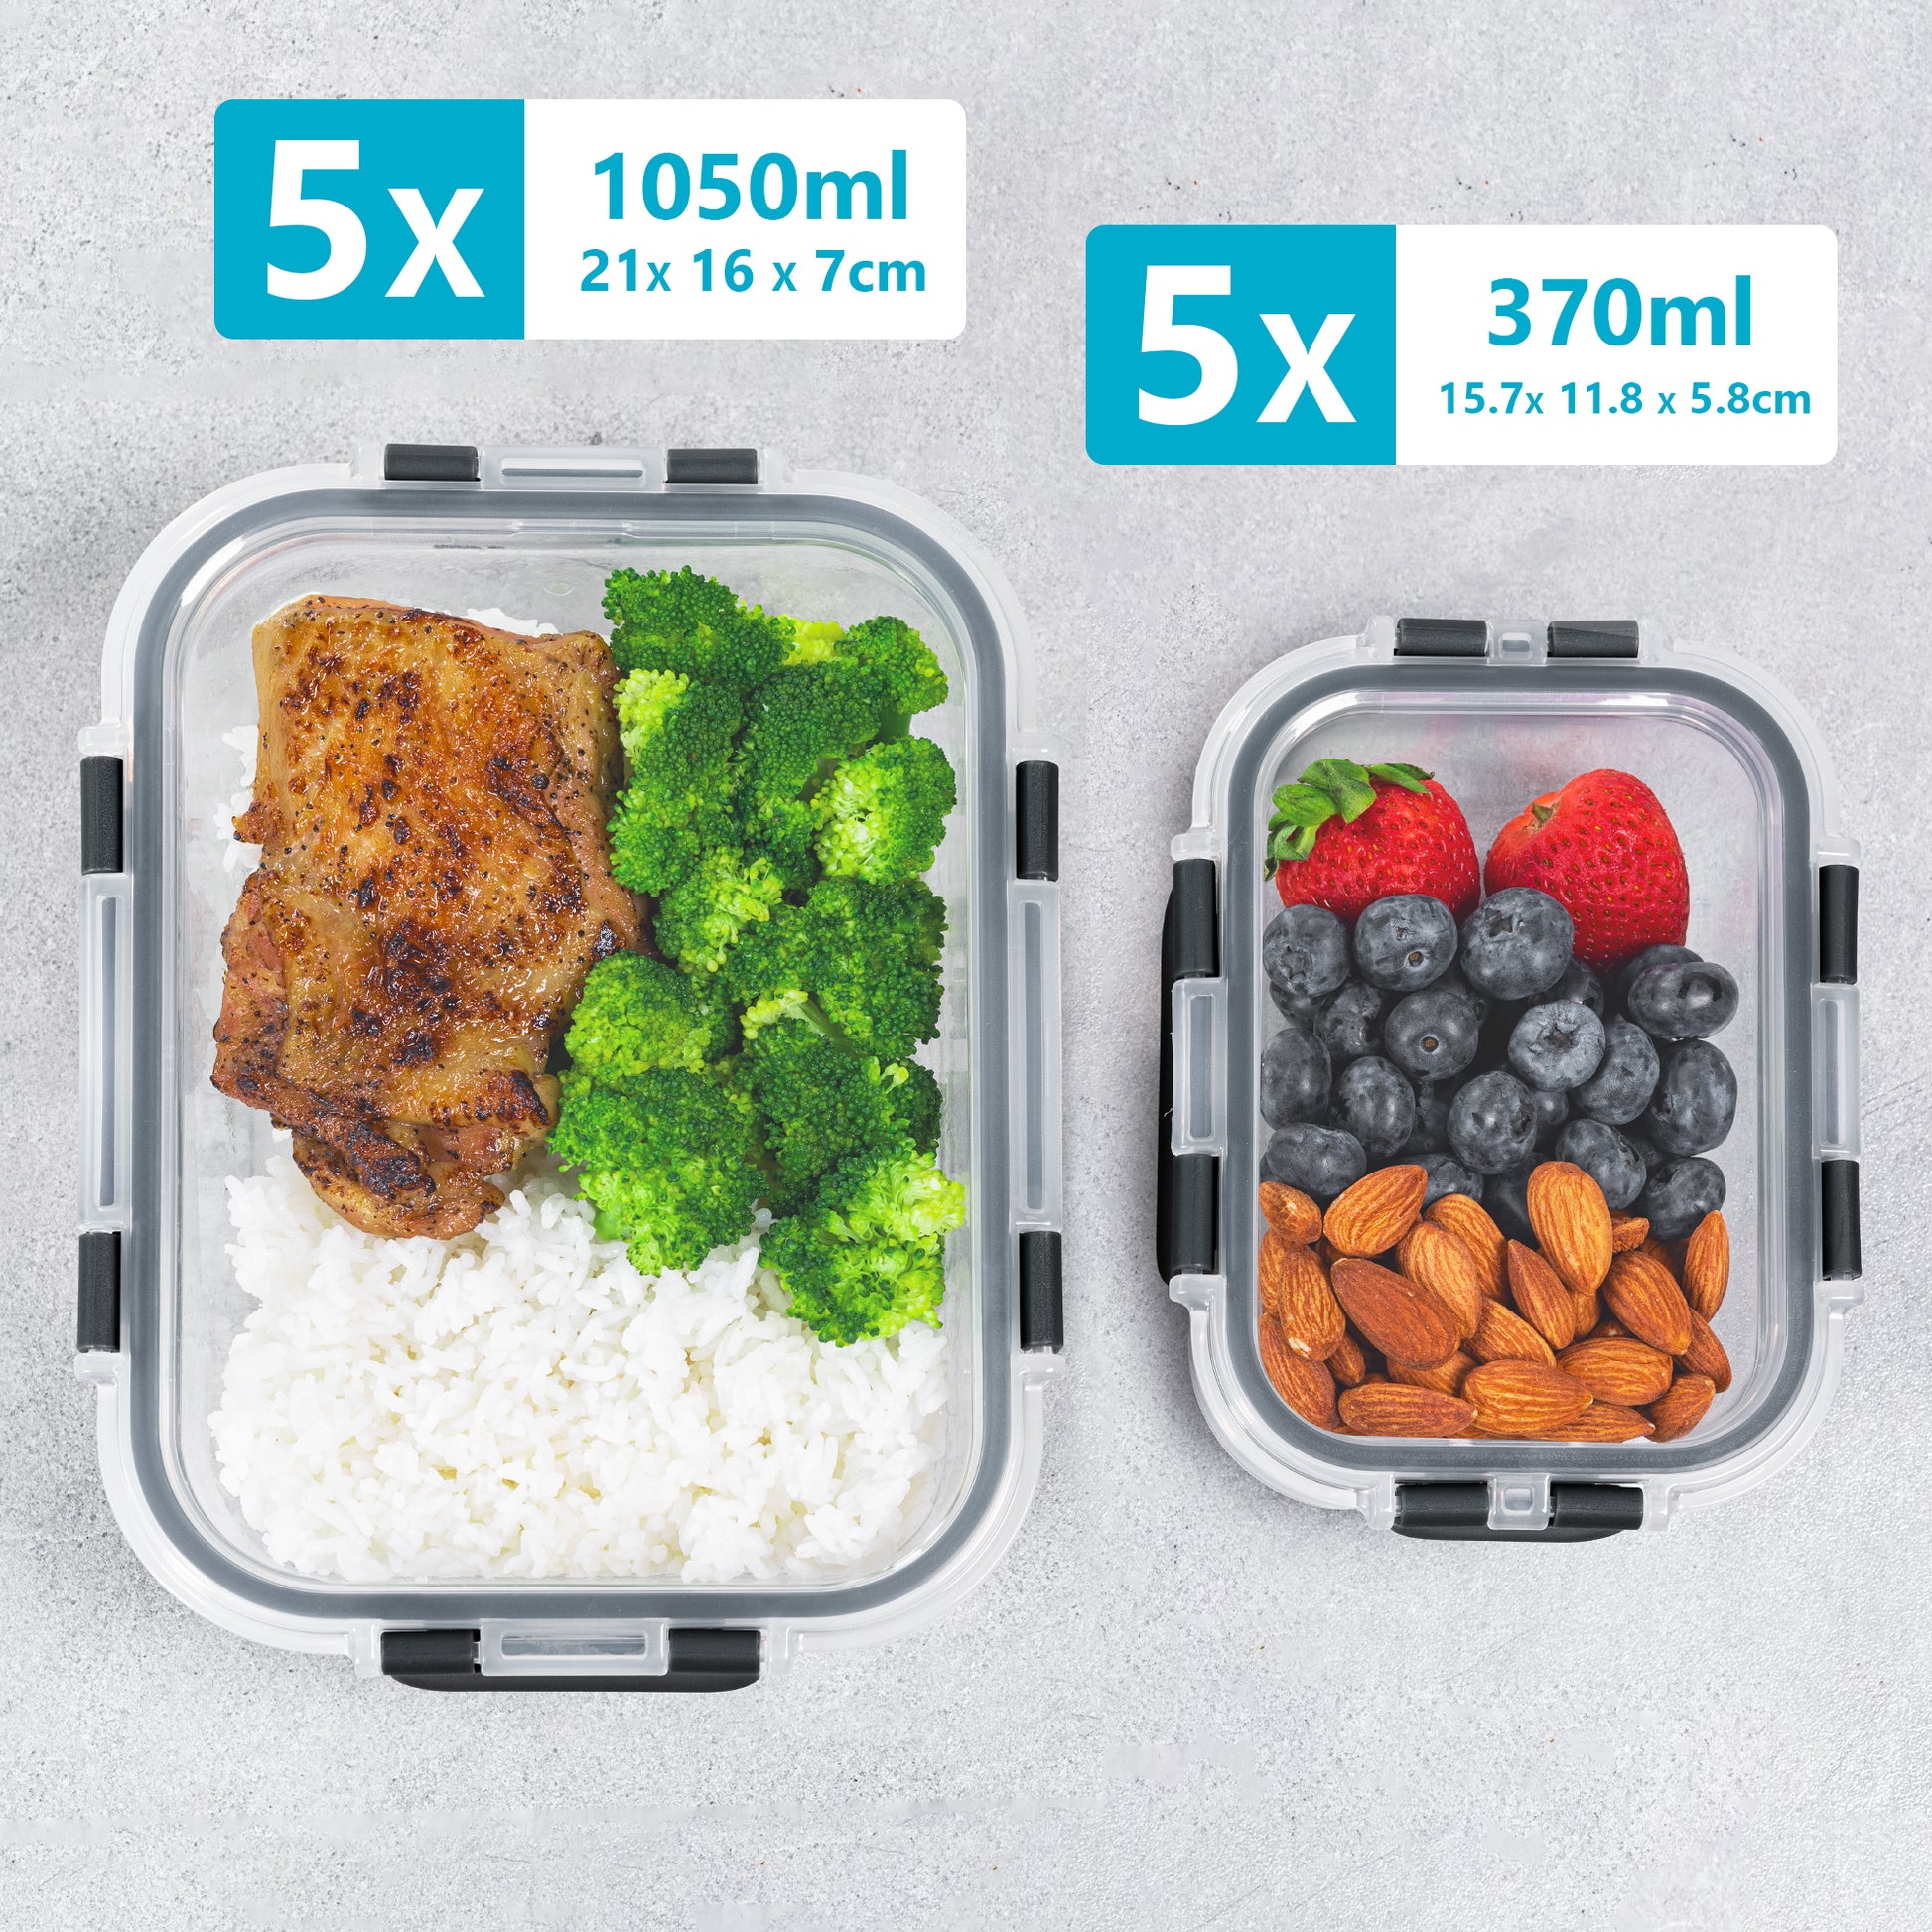  Igluu Meal Prep Containers [10 Pack] 2 Compartment with  Airtight Lids - Plastic Food Storage Bento Box - BPA Free - Reusable Lunch  Boxes - Microwavable, Freezer and Dishwasher Safe (30 oz): Home & Kitchen